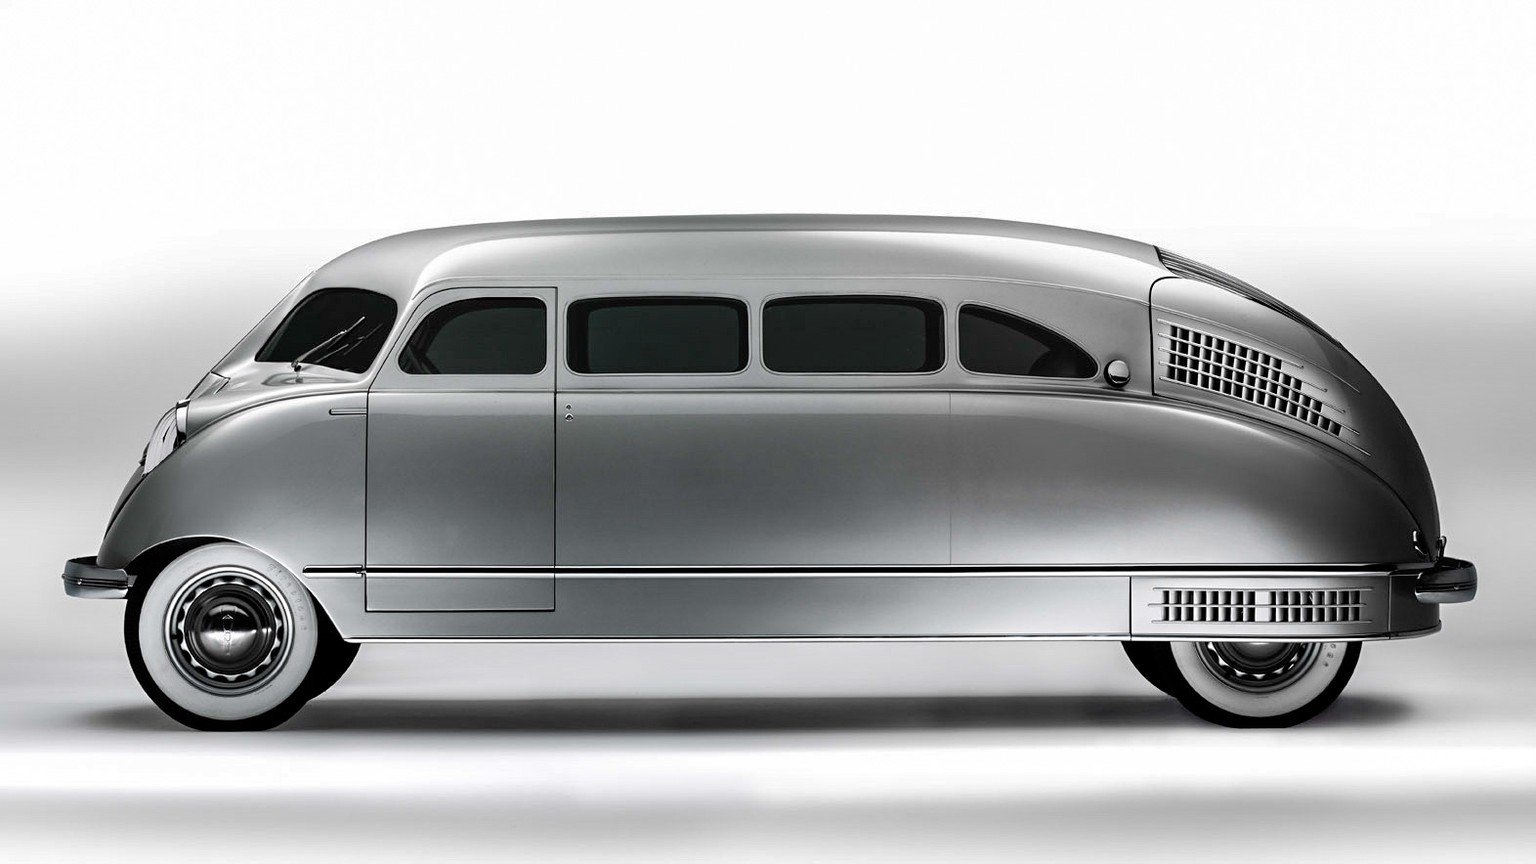 Concept Car of the Week: Stout Scarab (1936)
http://www.ba-bamail.com/content.aspx?emailid=20909